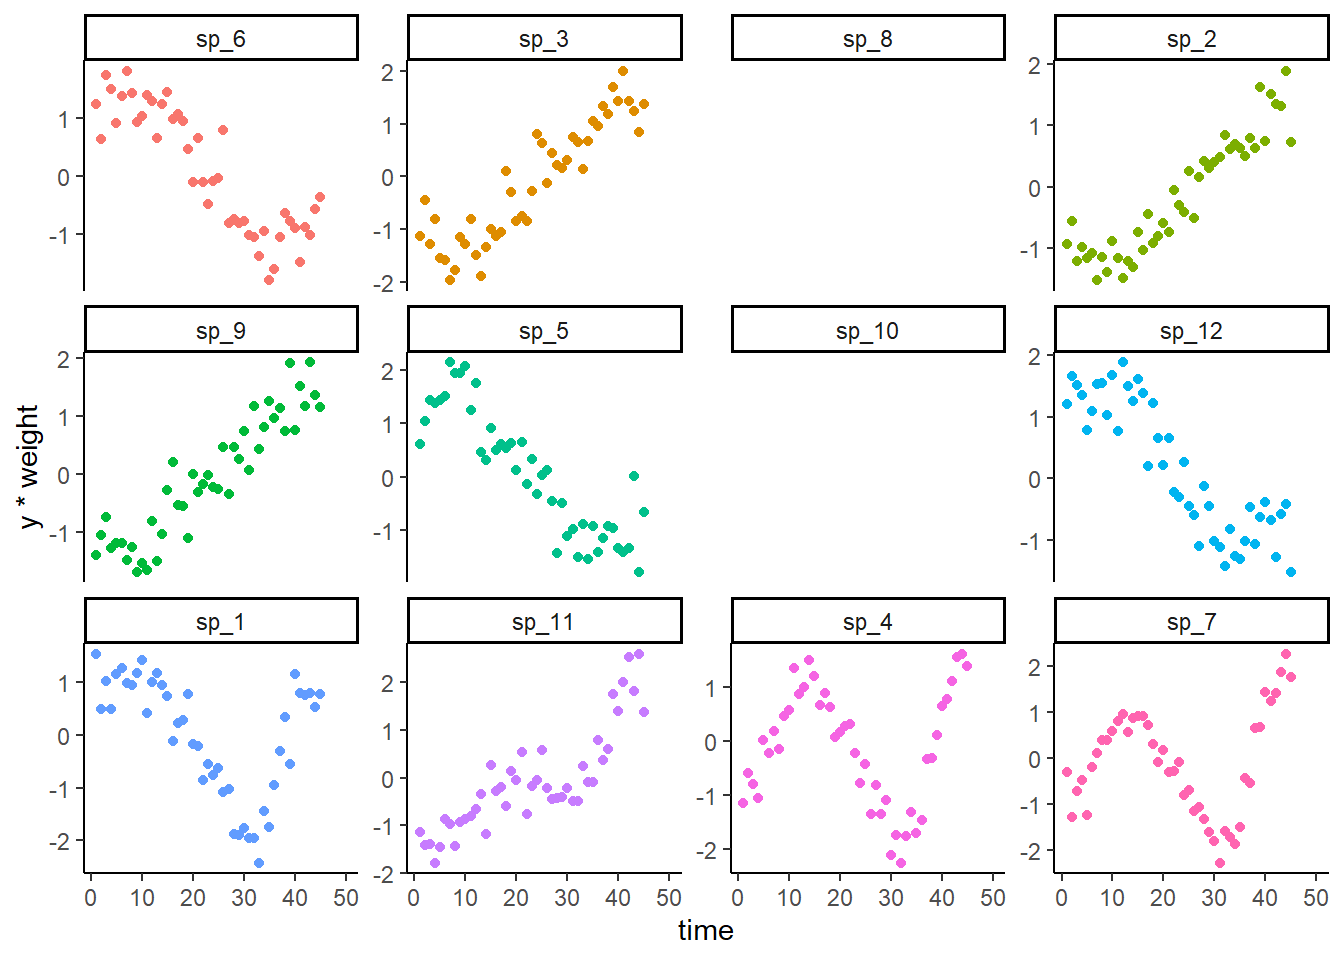 Simulating noisy observations of species' nonlinear time trends using phylogenetic relationships.